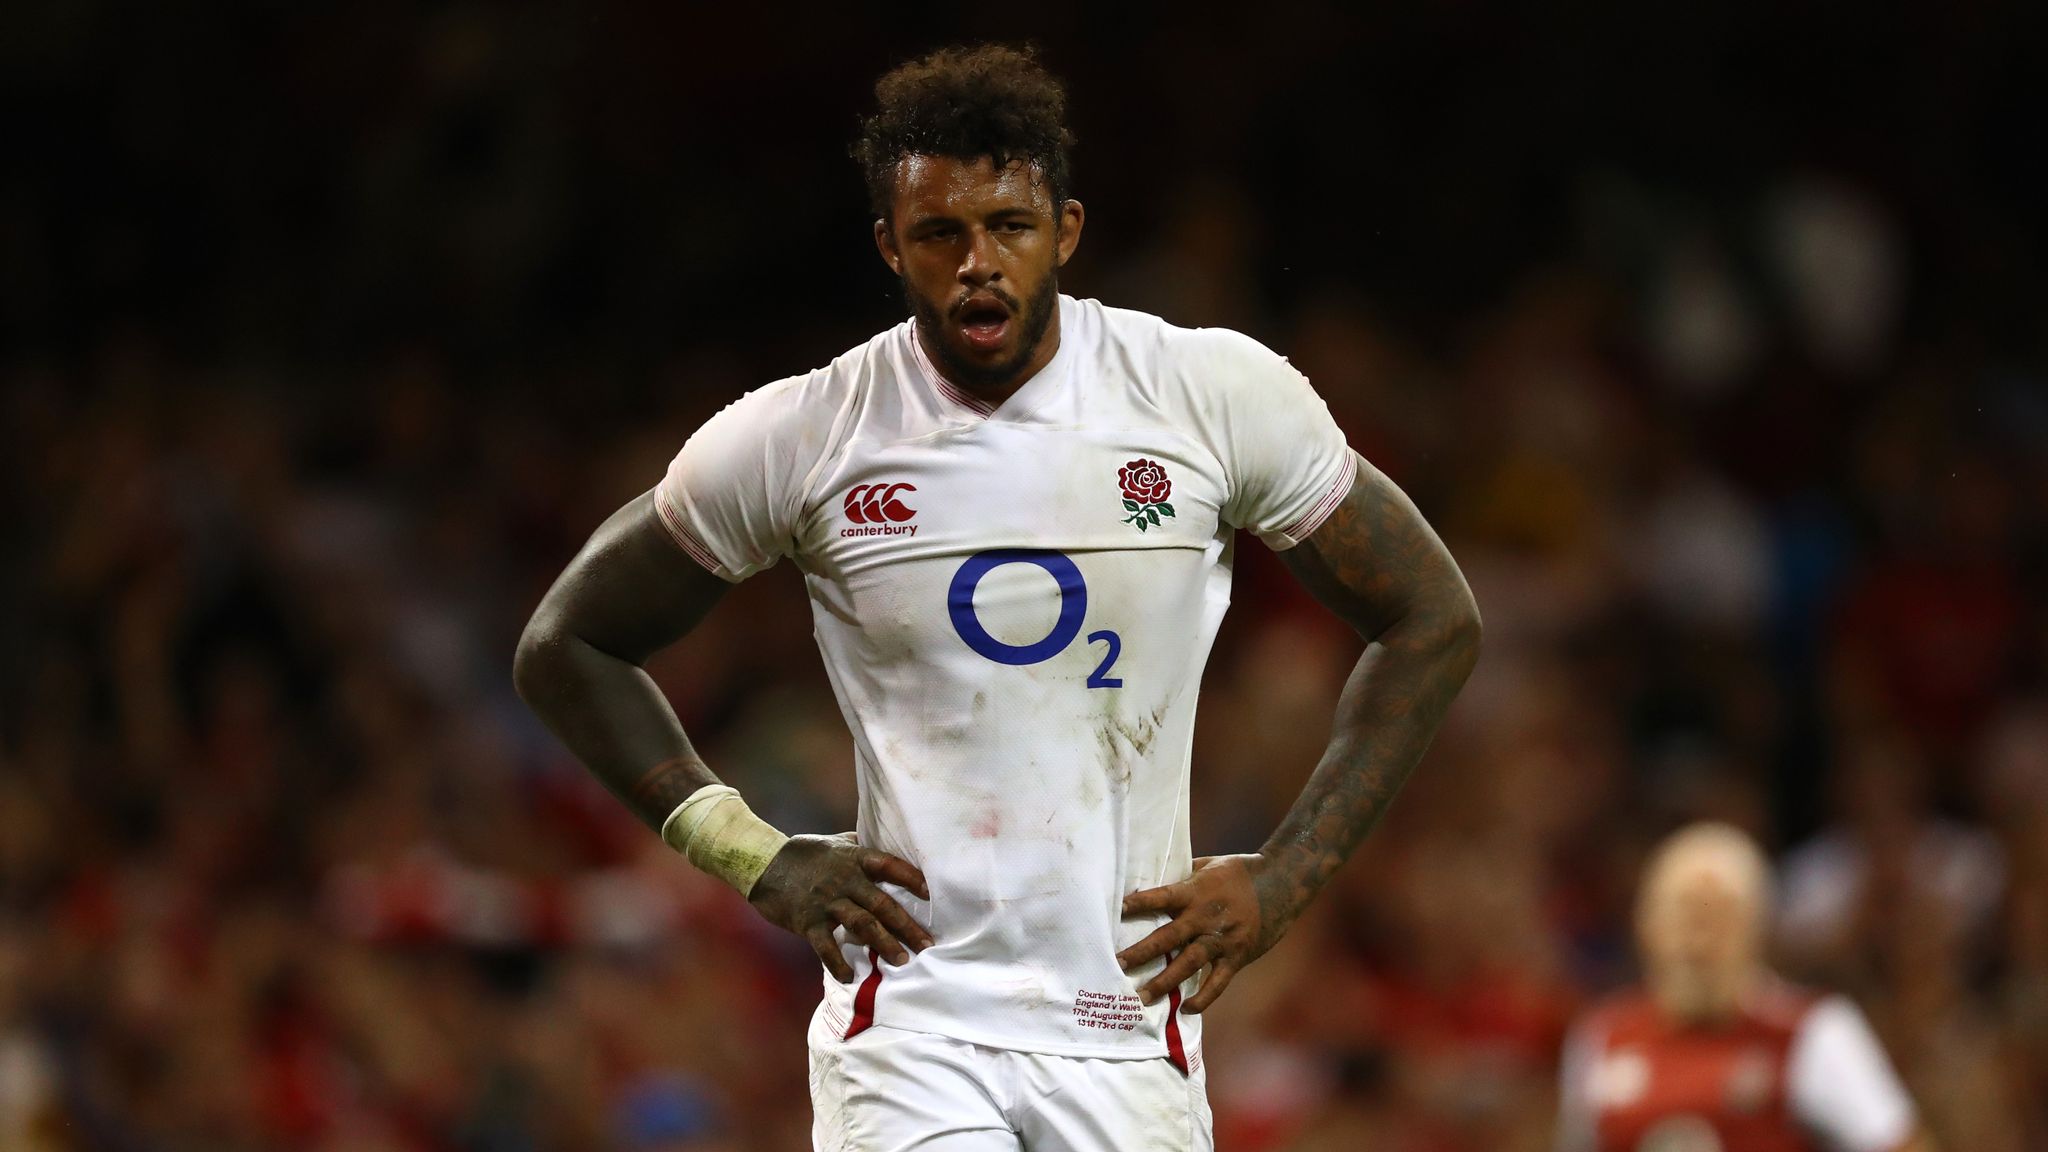 Courtney Lawes: The man who never gave up now vital for England | Rugby  Union News | Sky Sports